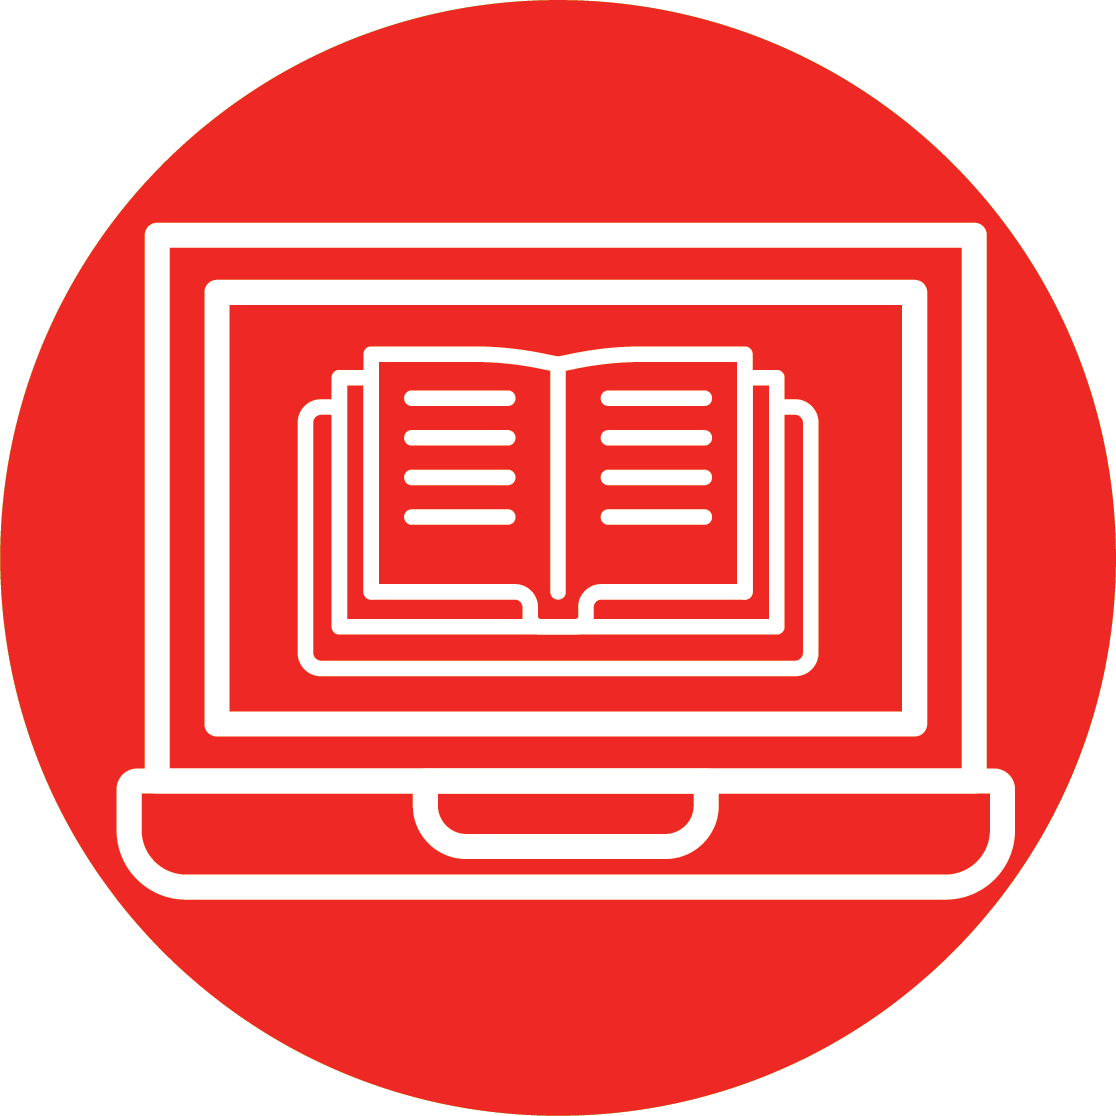 Online class icon, showing students reading a textbook through their computer at Santa Ana College